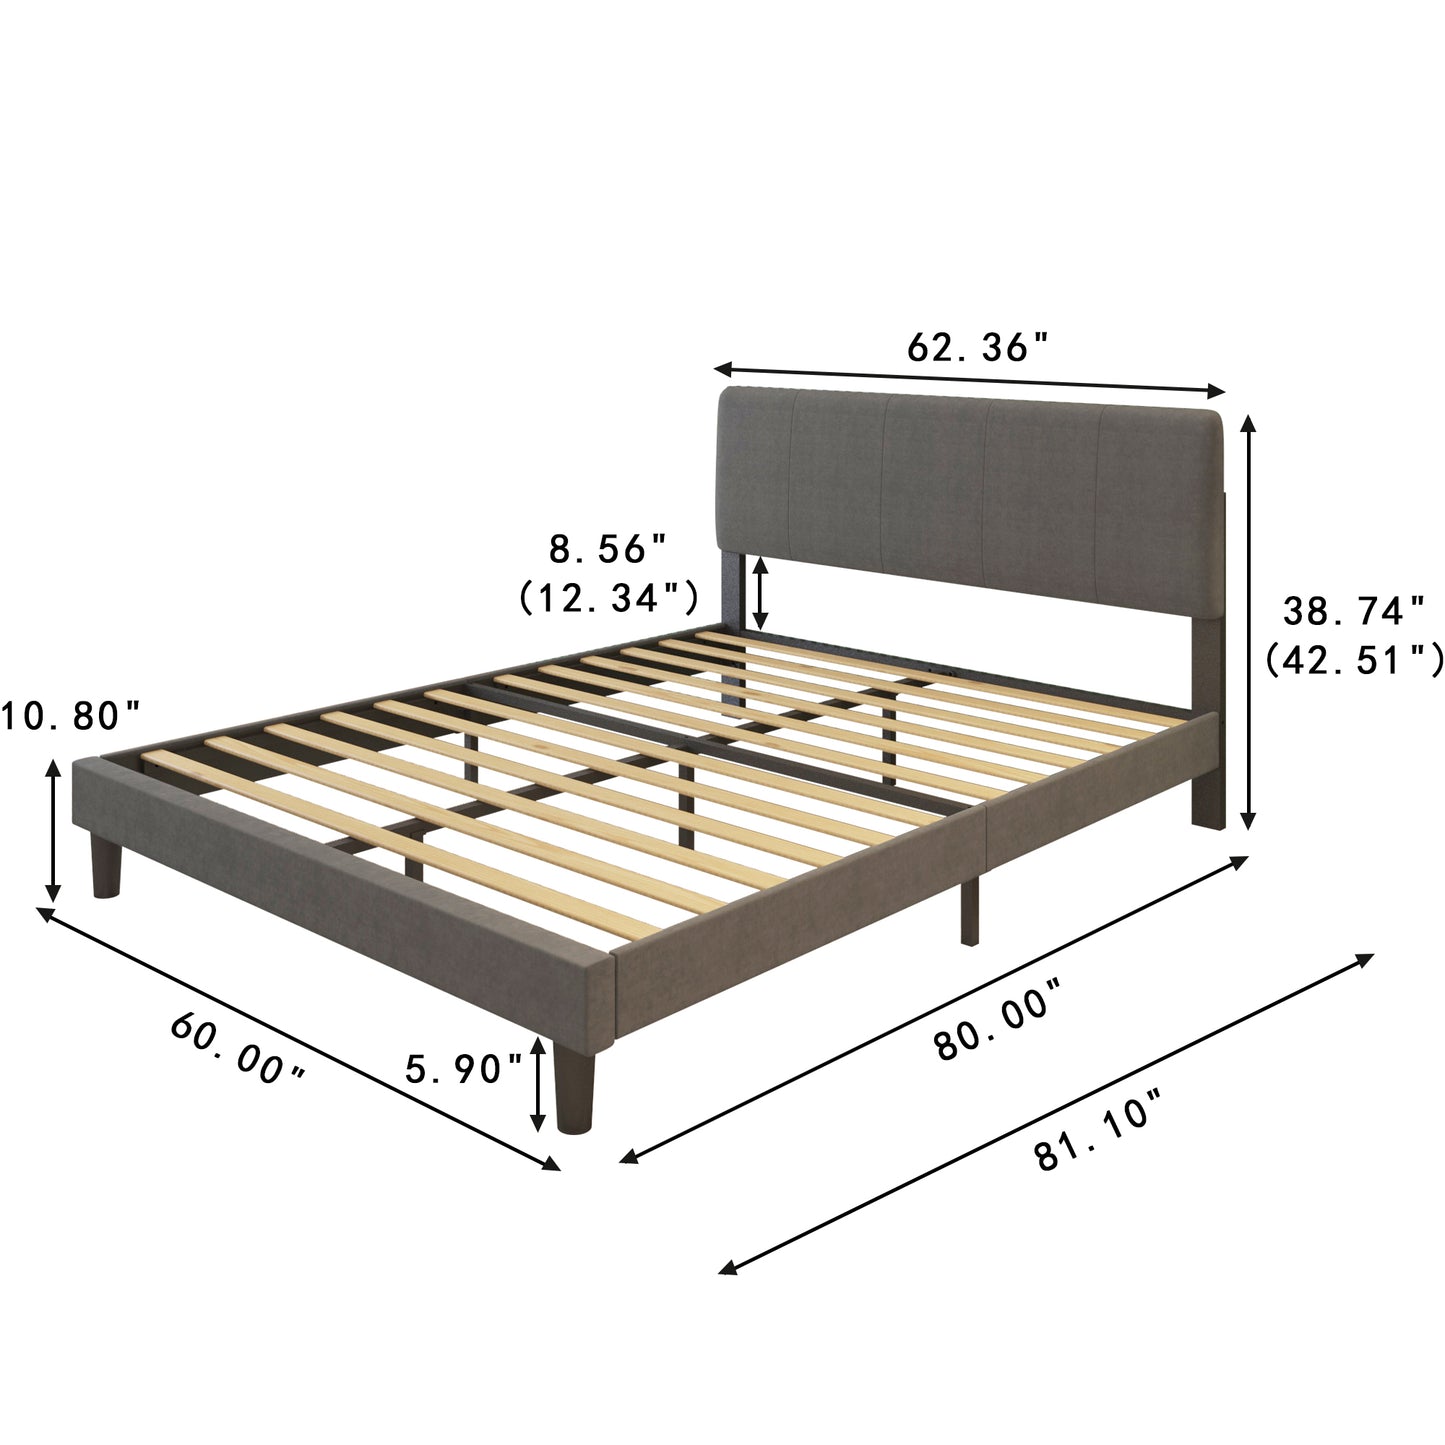 SYNGAR Queen Size Fabric Upholstered Platform Bed Frame with Elegant Headboard for Bedroom, No Box Spring Needed, Easy Assembly, Gray